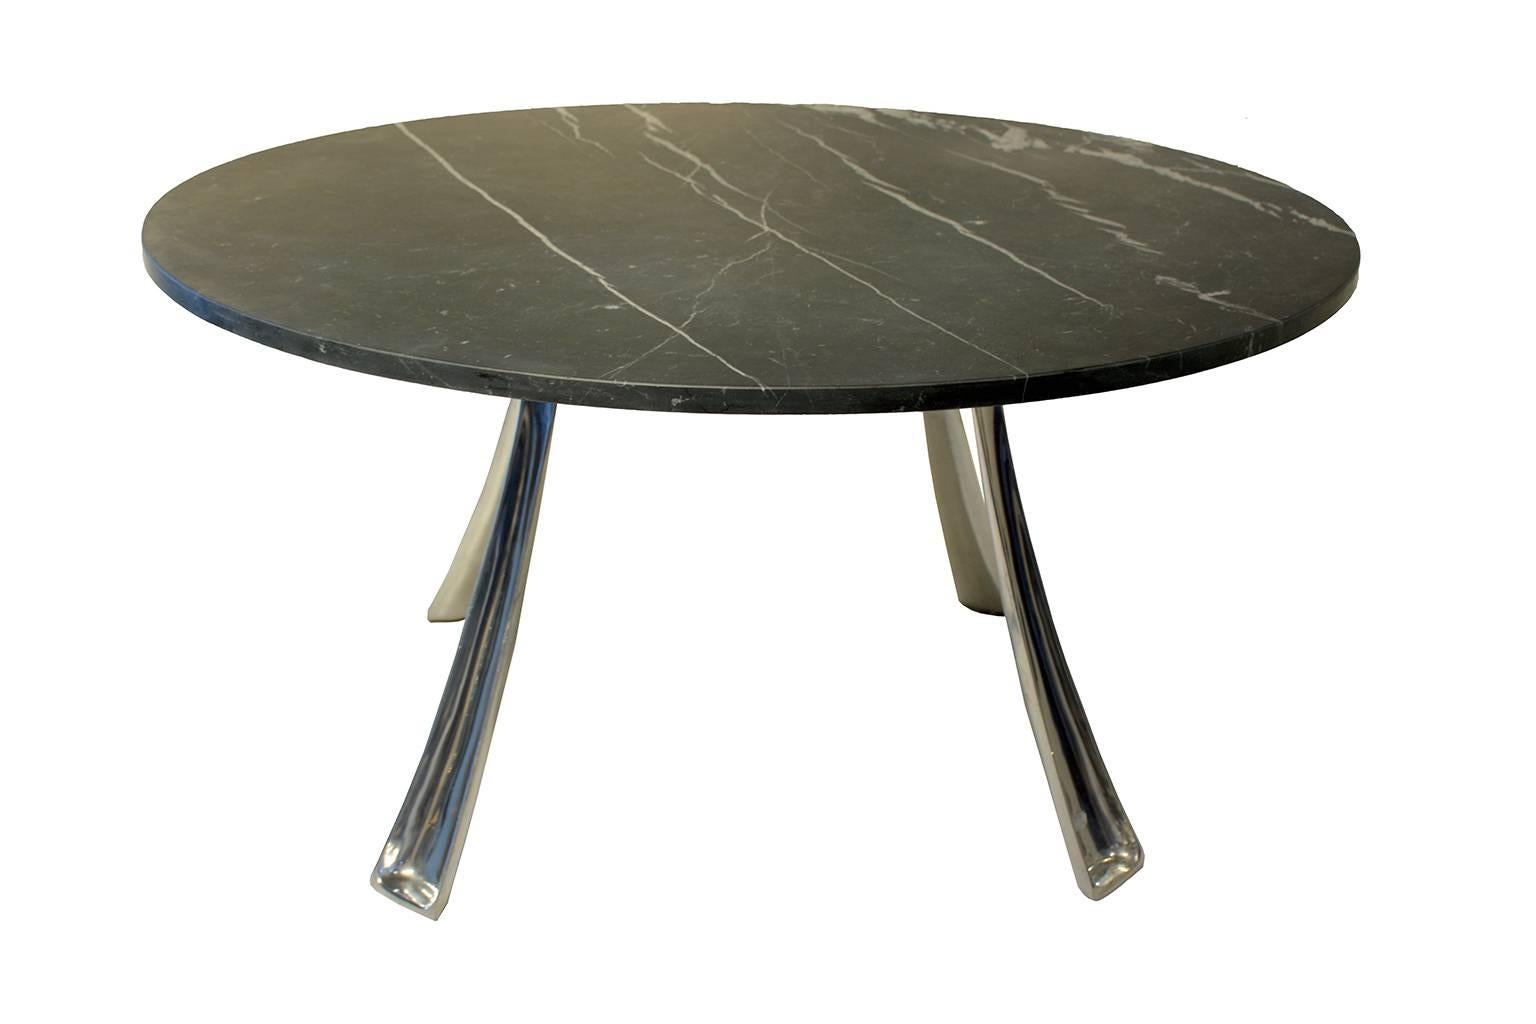 Aluminum base and marble top.